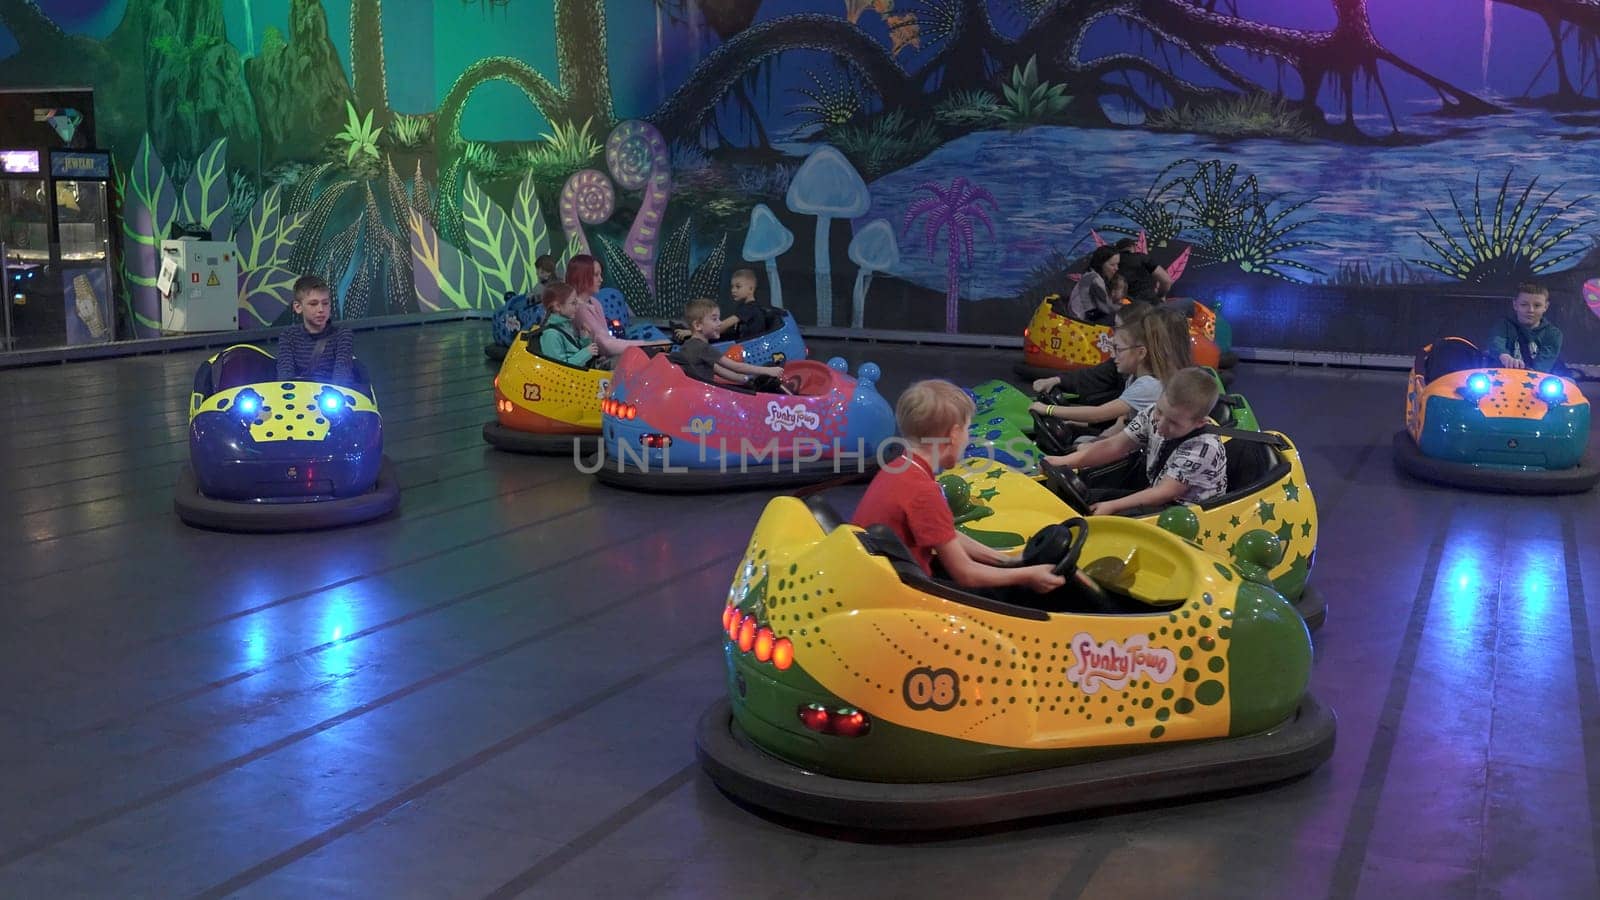 Serbia, Belgrade - June 20, 2023: Children on attraction with cars. Clip. Children ride on bumper car attraction. A lot of children are relaxing at weekend in amusement park with pushing cars.